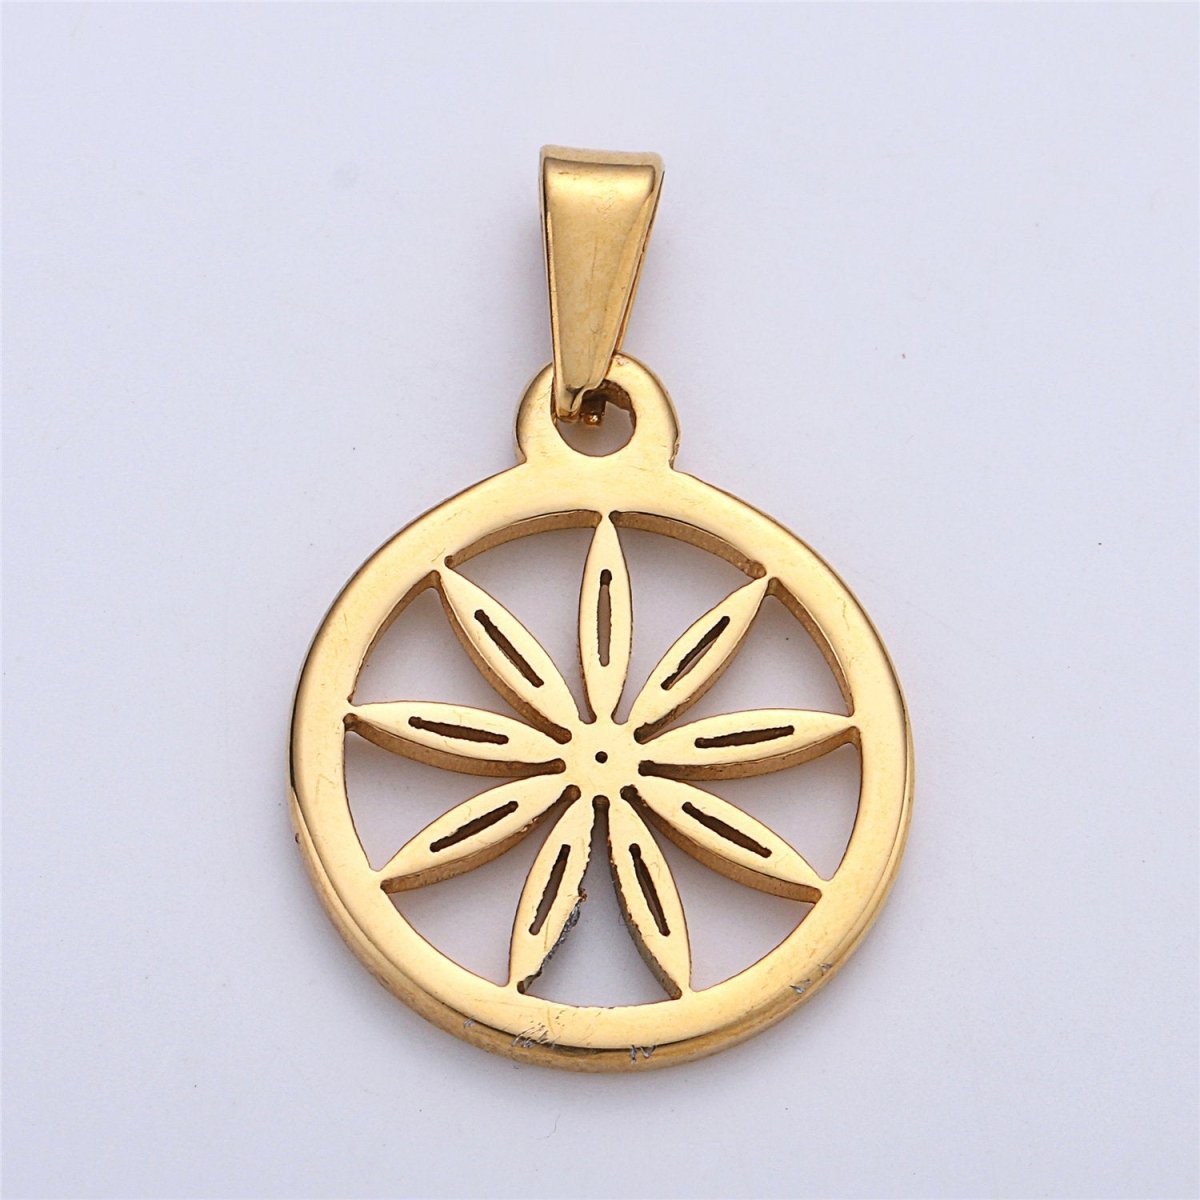 Gold Filled Stainless Steel Sun, Summer Sunshine Charm Pendant with Bails Golden Shiny Sun Necklace Findings for Jewelry Making 30x20mm J-667 - DLUXCA